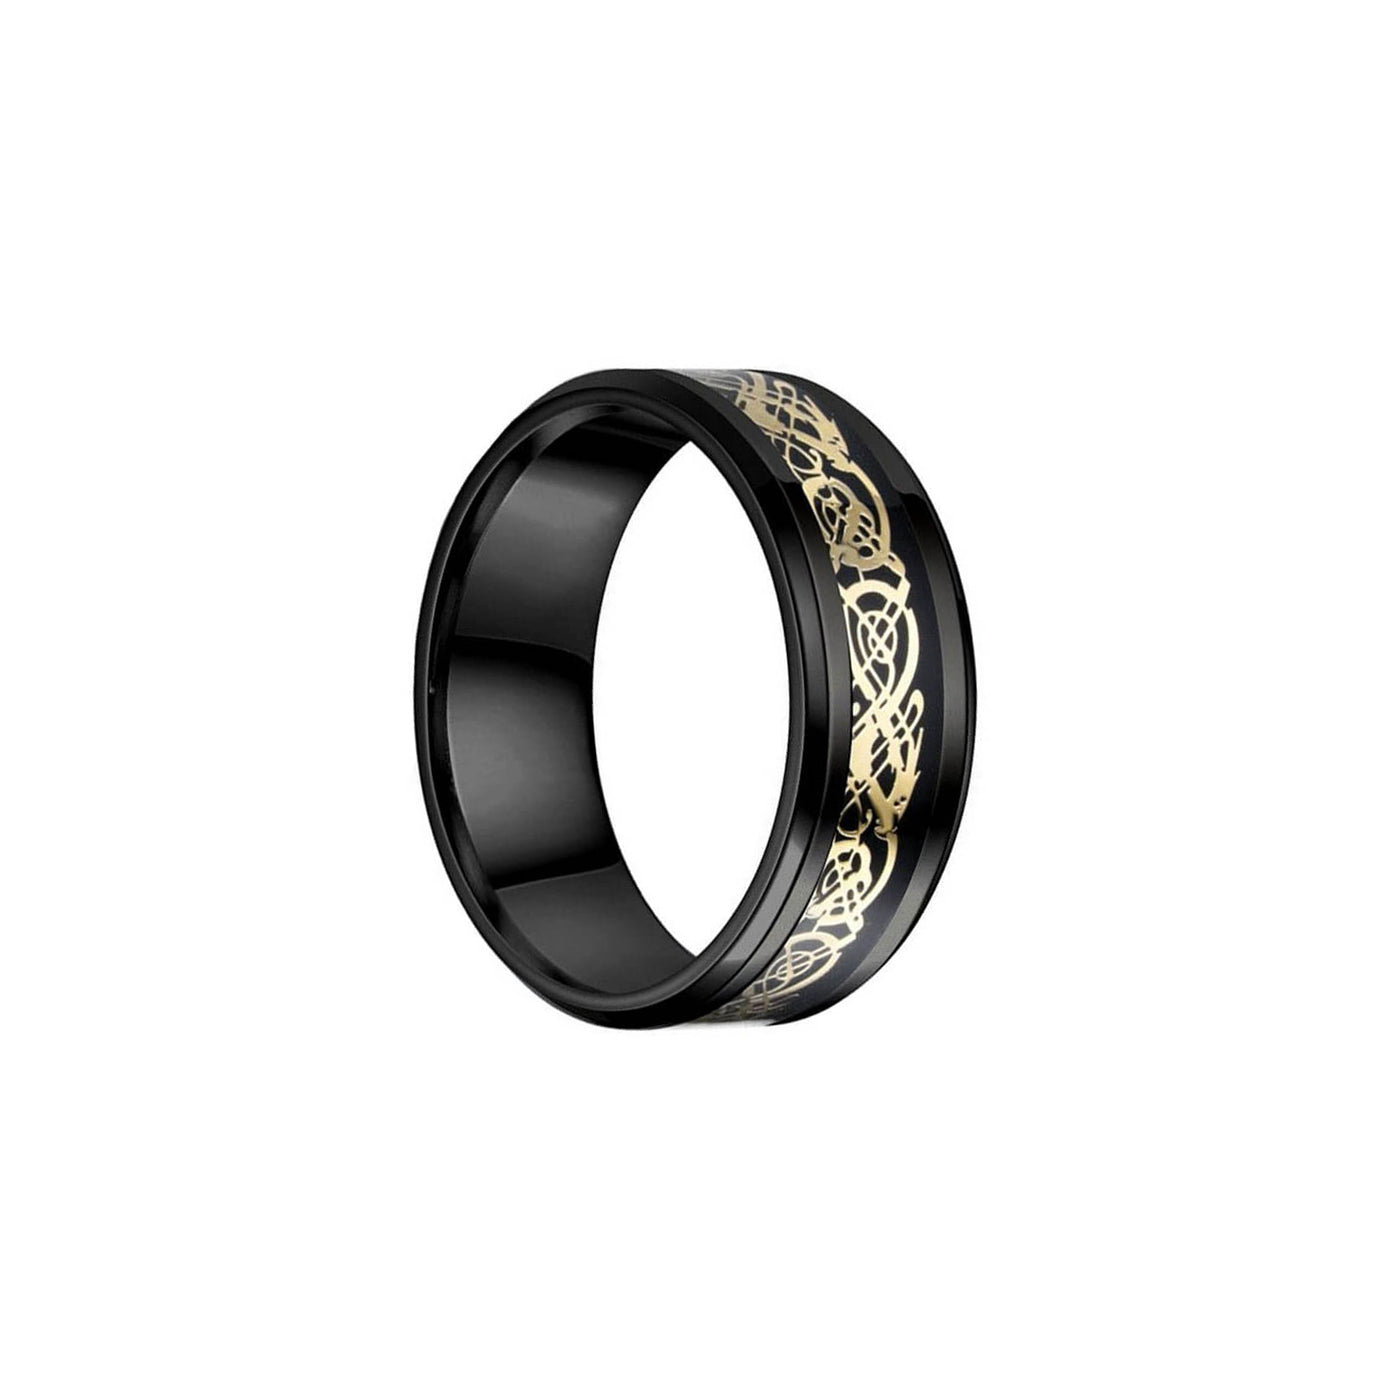 Black gold textured steel ring 8mm